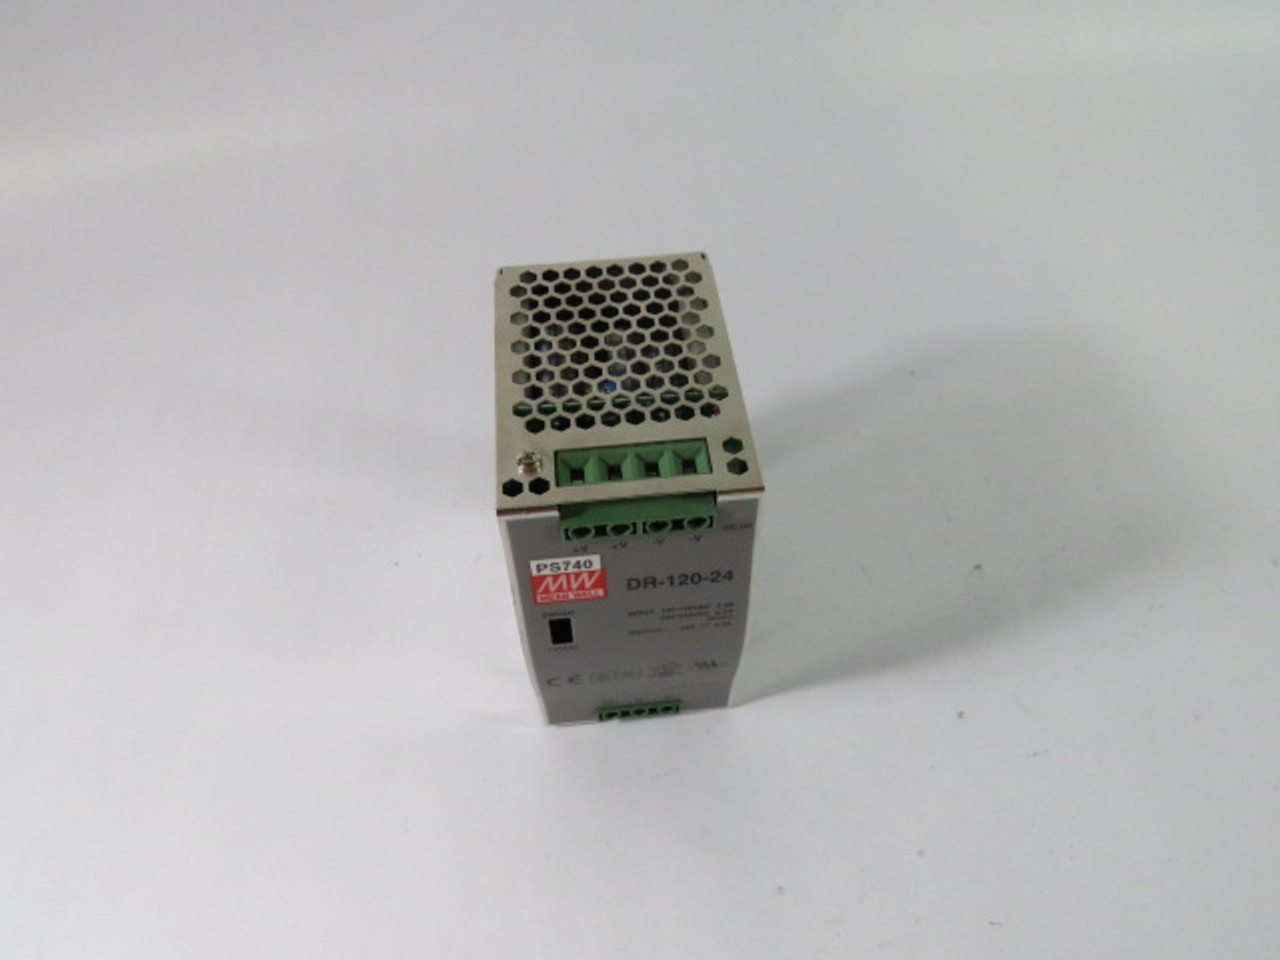 Phoenix Contact DR-120-24 Industrial Power Supply USED